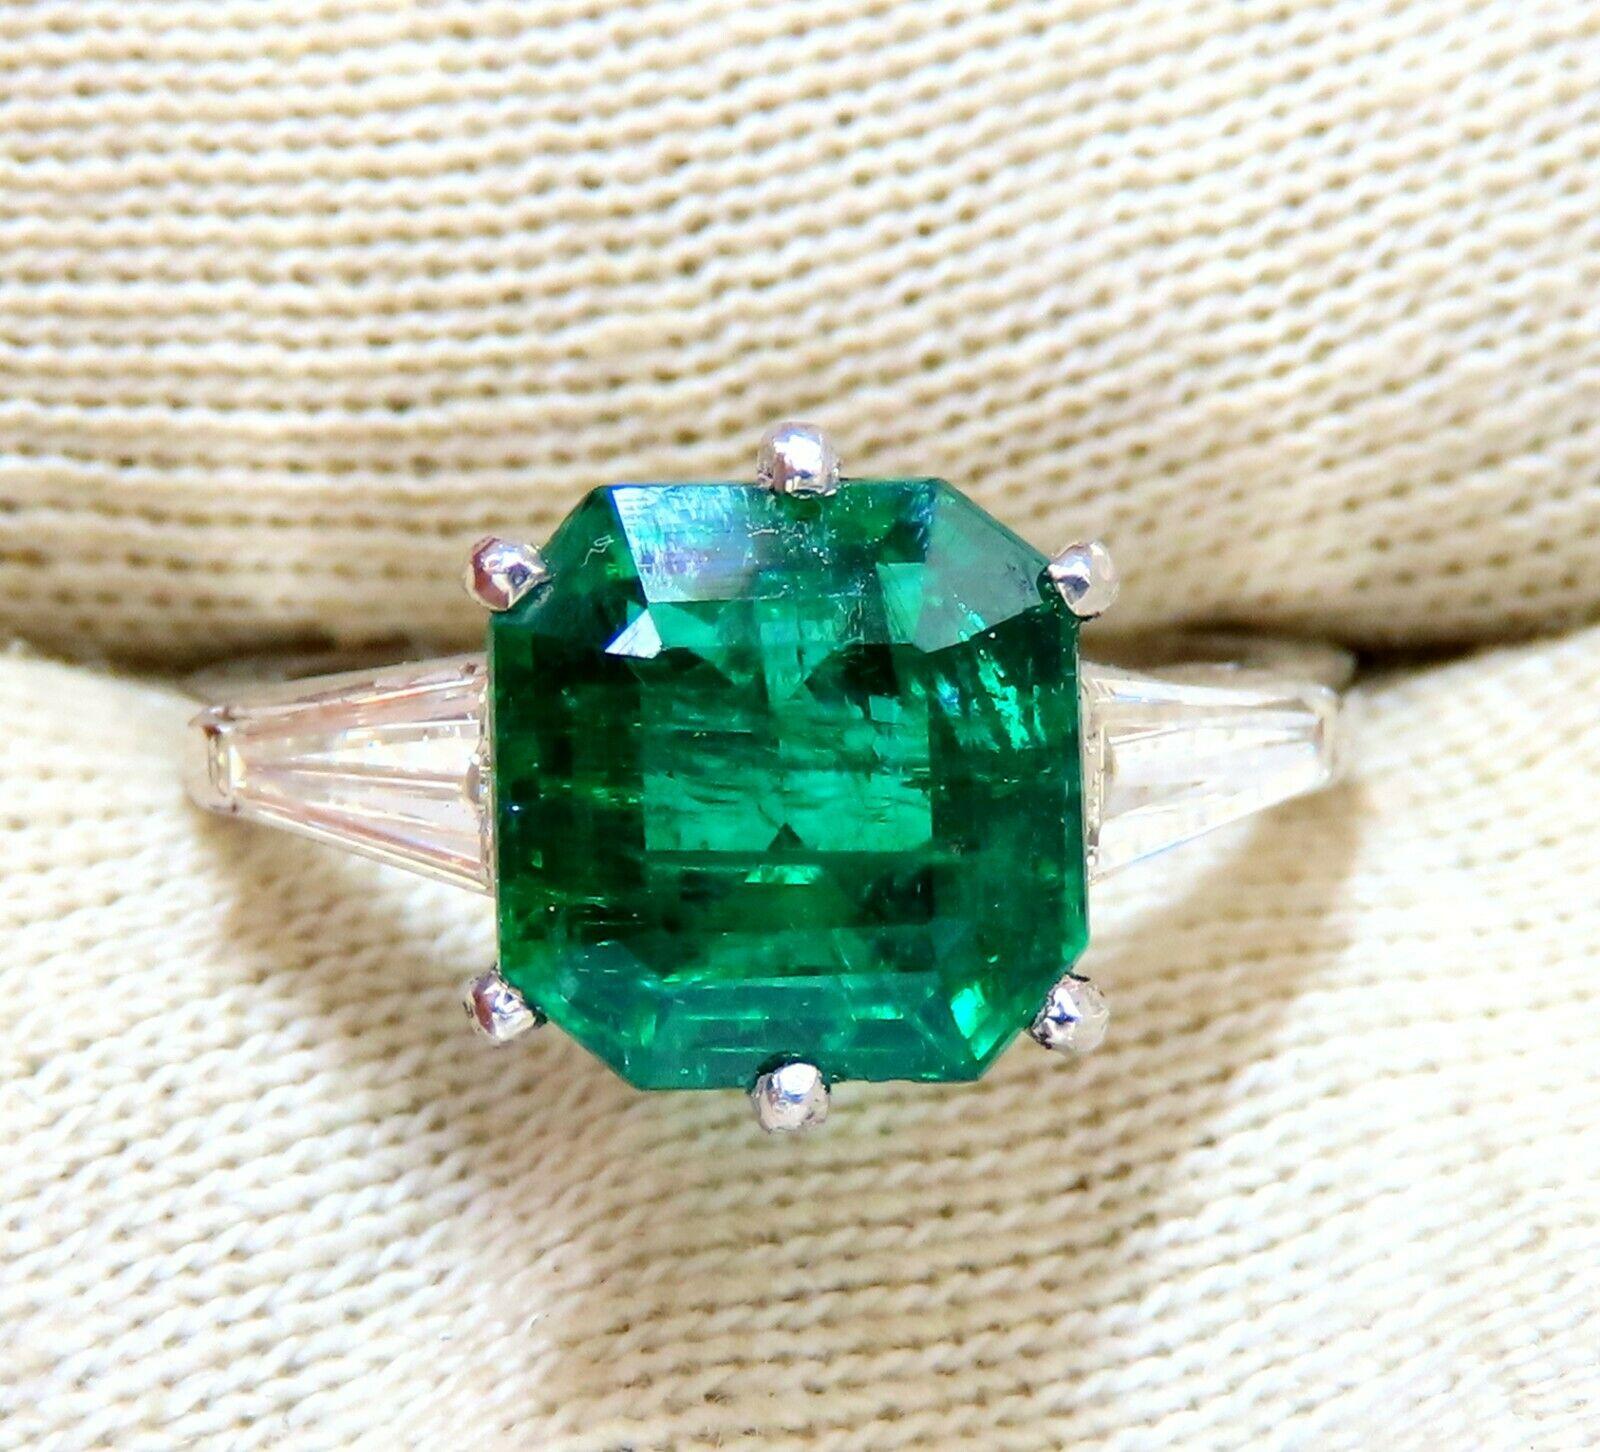 Halo Green.

3.16ct. Natural Emerald Ring GIA Certified: #2215617128(To Accompany)

9.01 X 8.78 x 5.38mm

Full cut Emerald Cut brilliant

Clean Clarity & Transparent

(F3) Vivid Green / Zambia Best

.50ct. Diamonds.

Round & full cuts G-color Vs-2